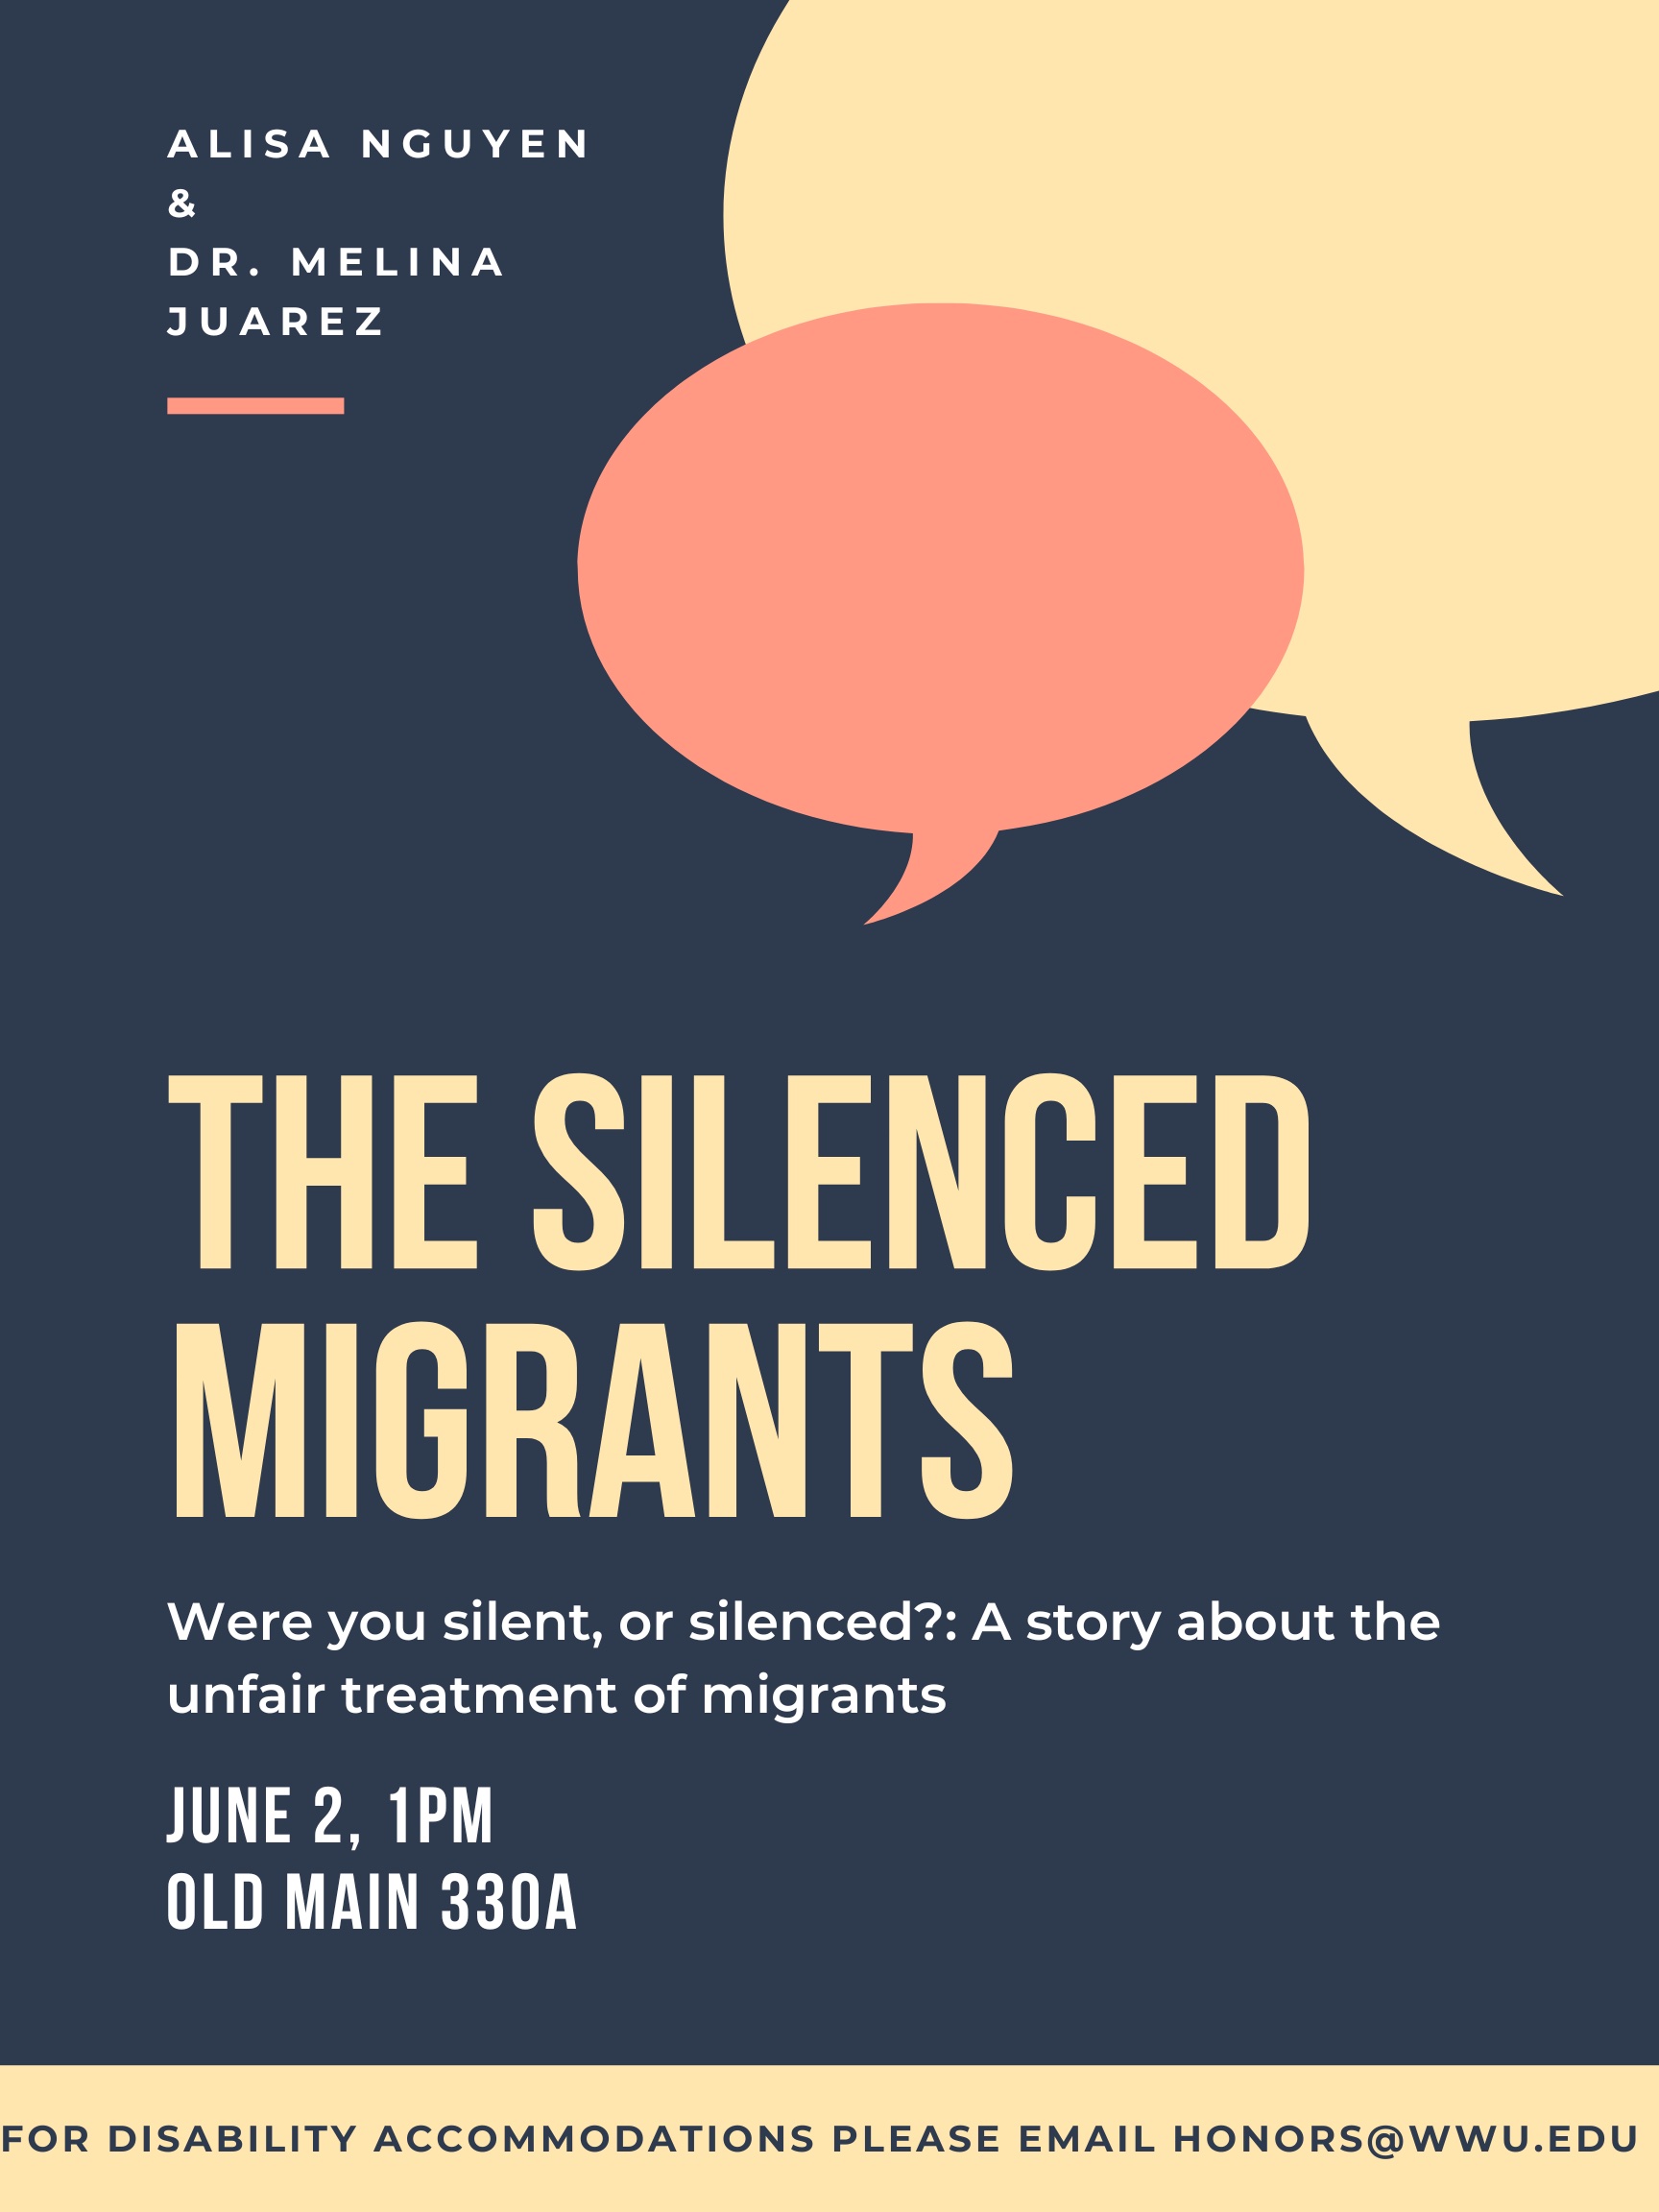 A poster with a dark blue background and yellow and red speech bubbles in the upper right corner. Text on top left reads "Alisa Nguyen & Dr. Melina Juarez." In the middle the text reads "The Silenced Migrants," with subtext below reading "Were you silent, or silenced?: A story about the unfair treatment of migrants. Senior recital and capstone project presentation. June 2nd, 1PM; Old Main 330A. For disability accommodations please email honors@wwu.edu."